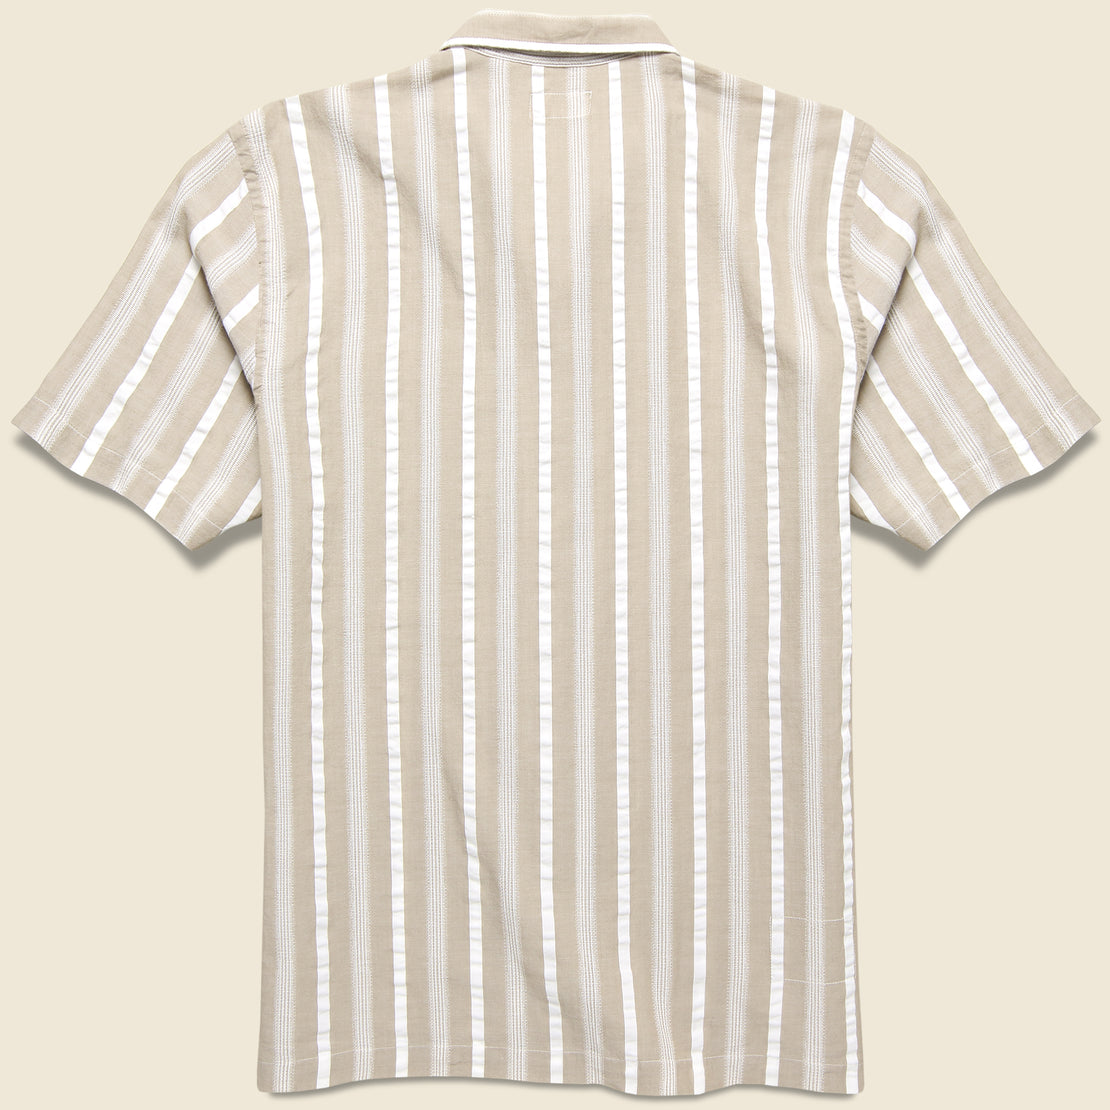 Togo Stripe Road Shirt - Sand - Universal Works - STAG Provisions - Tops - S/S Woven - Stripe